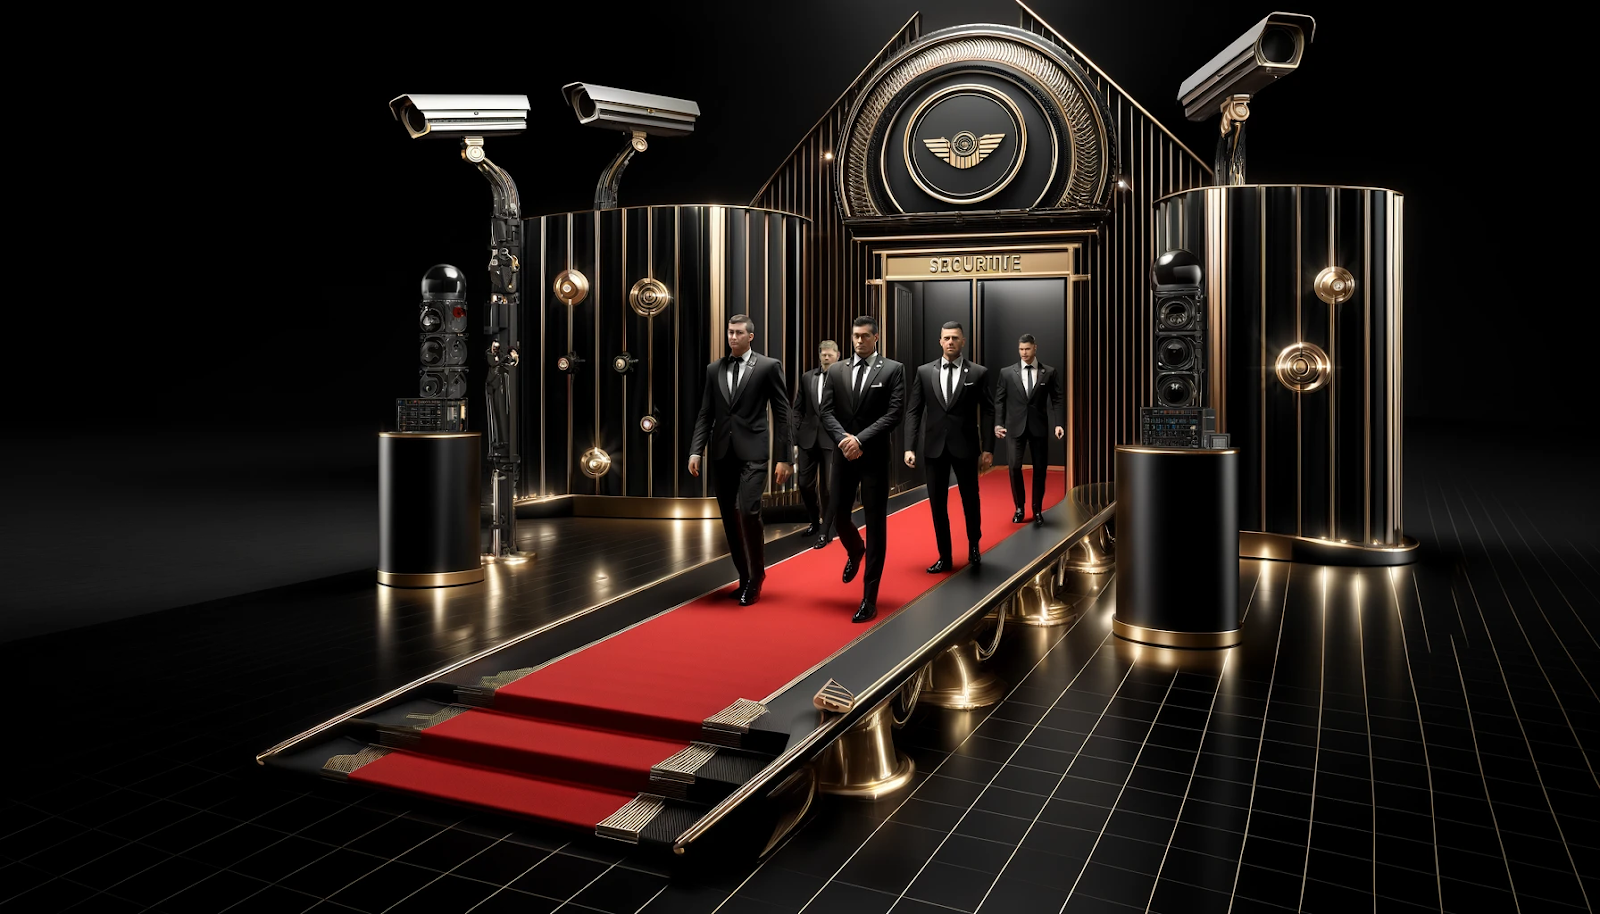 This is a symbolic security setup with black-suited guards, a red carpet, and surveillance equipment. The colors black and gold represent sophistication and professionalism.